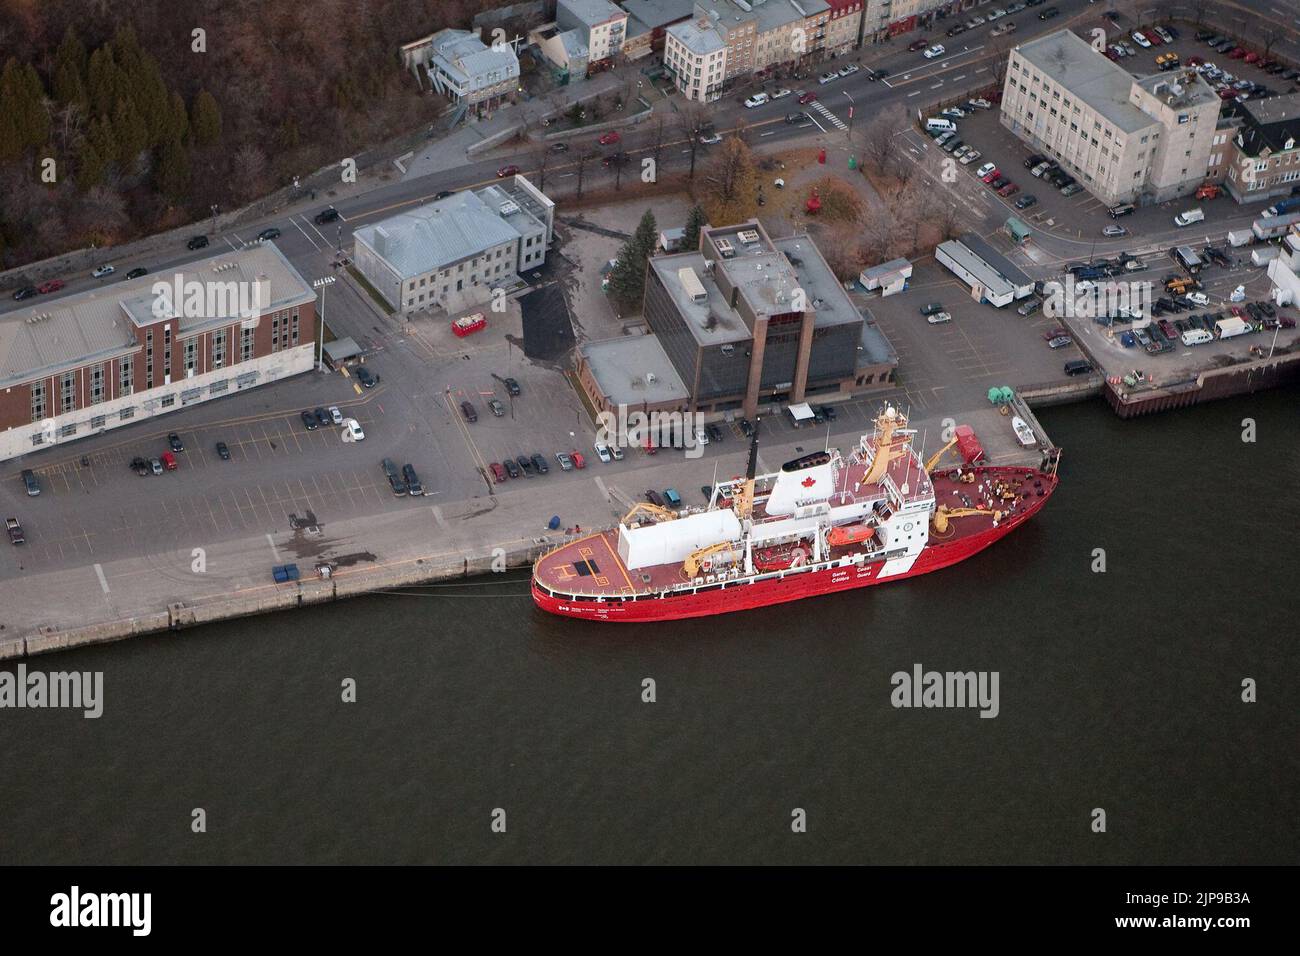 A Canadian coast guard ship is see at the Quebec city base in this aerial photo November 11, 2009. Canadian coast guard is the civilian federal agency responsible for providing maritime search and rescue (SAR), aids to navigation, marine pollution response, marine radio, and icebreaking. Stock Photo